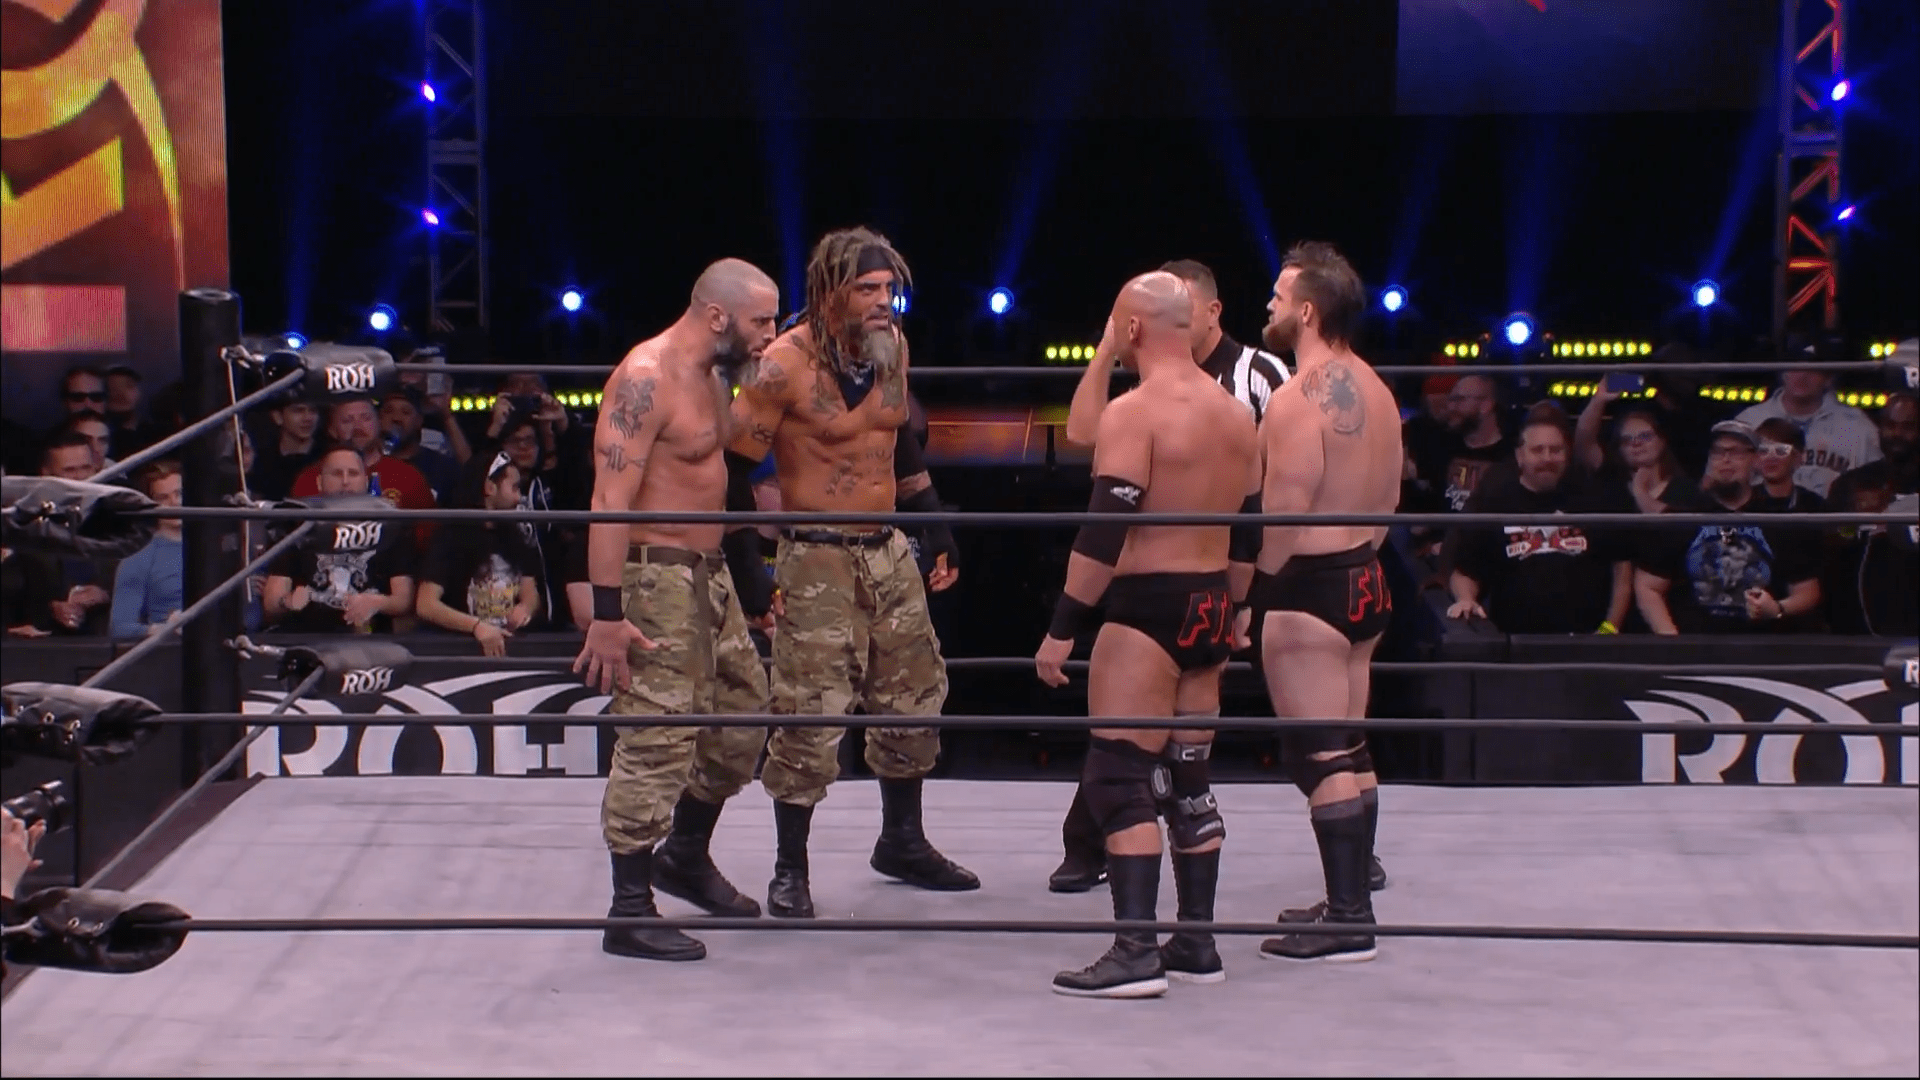 FTR and the Briscoes